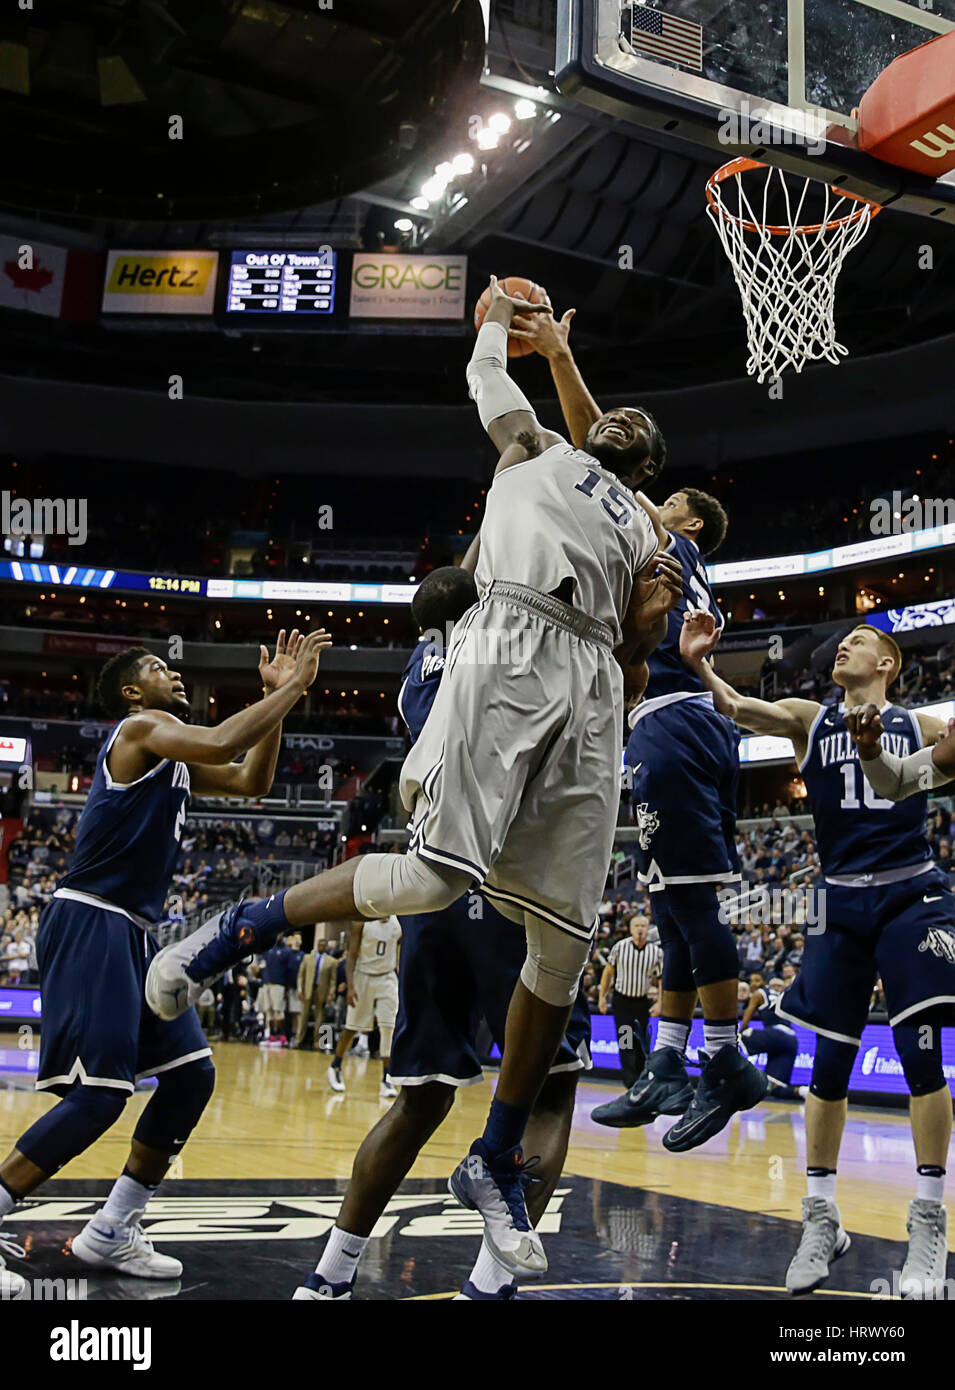 March 4, 2017: Georgetown Hoyas C #15 Jessie Govan stretches for the rebound during a NCAA Men's Basketball game between the Georgetown Hoyas and the Villanova Wildcats at the Verizon Center in Washington, DC Hoyas trail the Wildcats at half time, 28-38. Justin Cooper/CSM Stock Photo